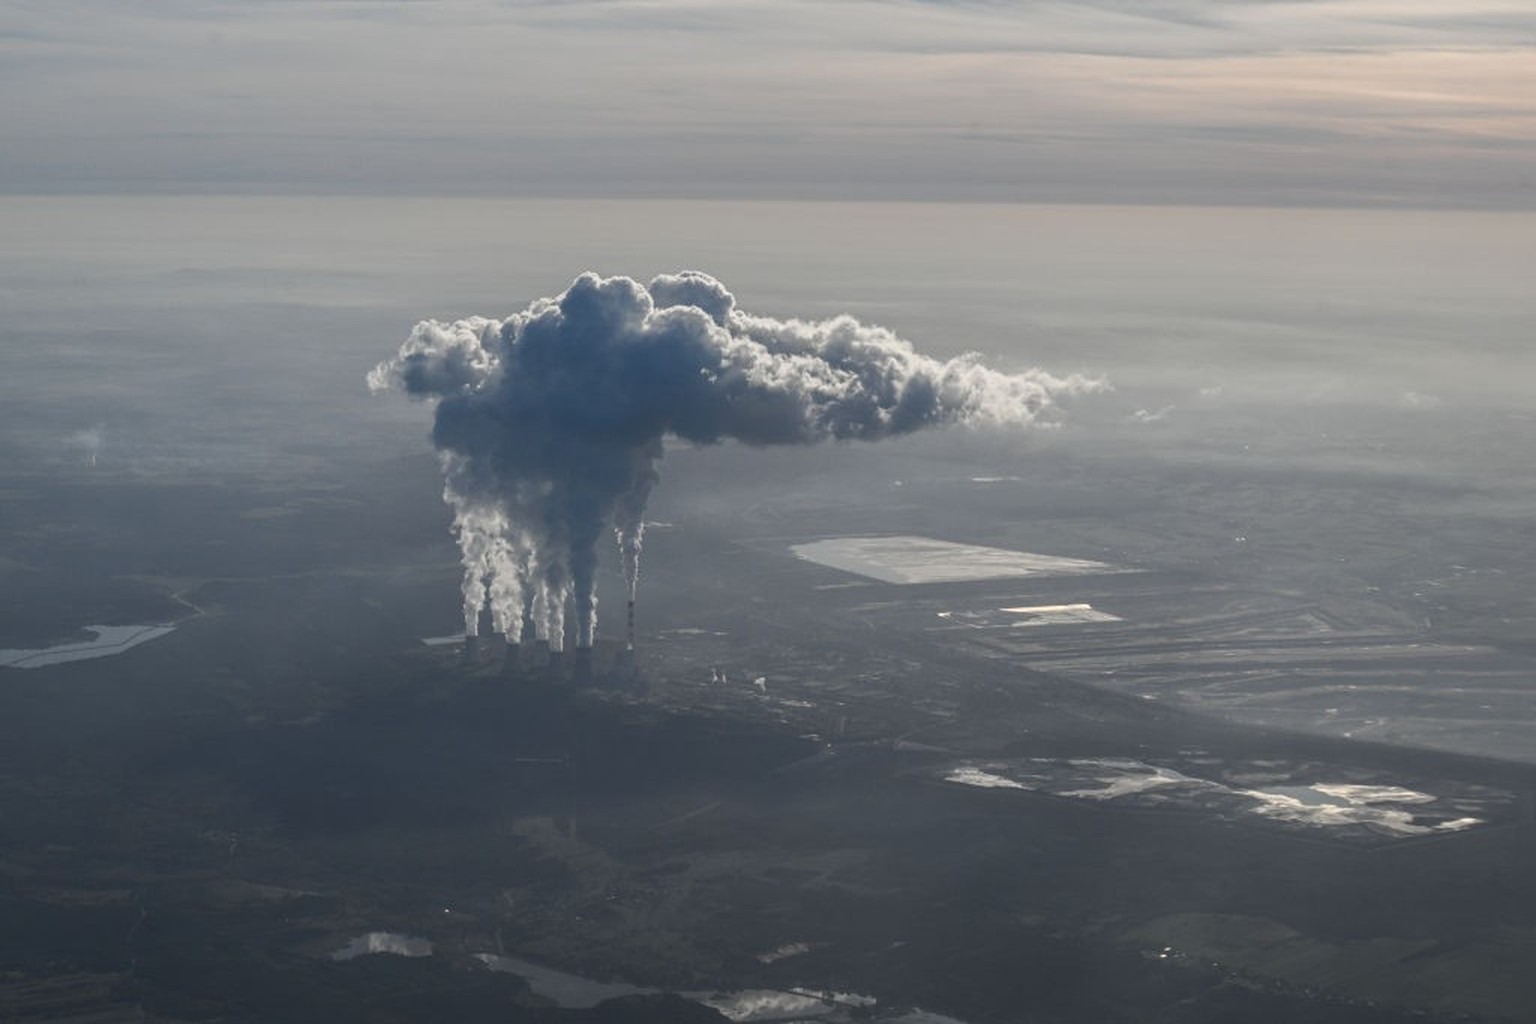 BELCHATOW, POLAND - OCTOBER 12: Steam and smoke rises from the Belchatow Coal Powered Station, as seen from an aircraft on October 12, 2022 in Belchatow, Poland. The Belchatow coal-powered station, wi ...